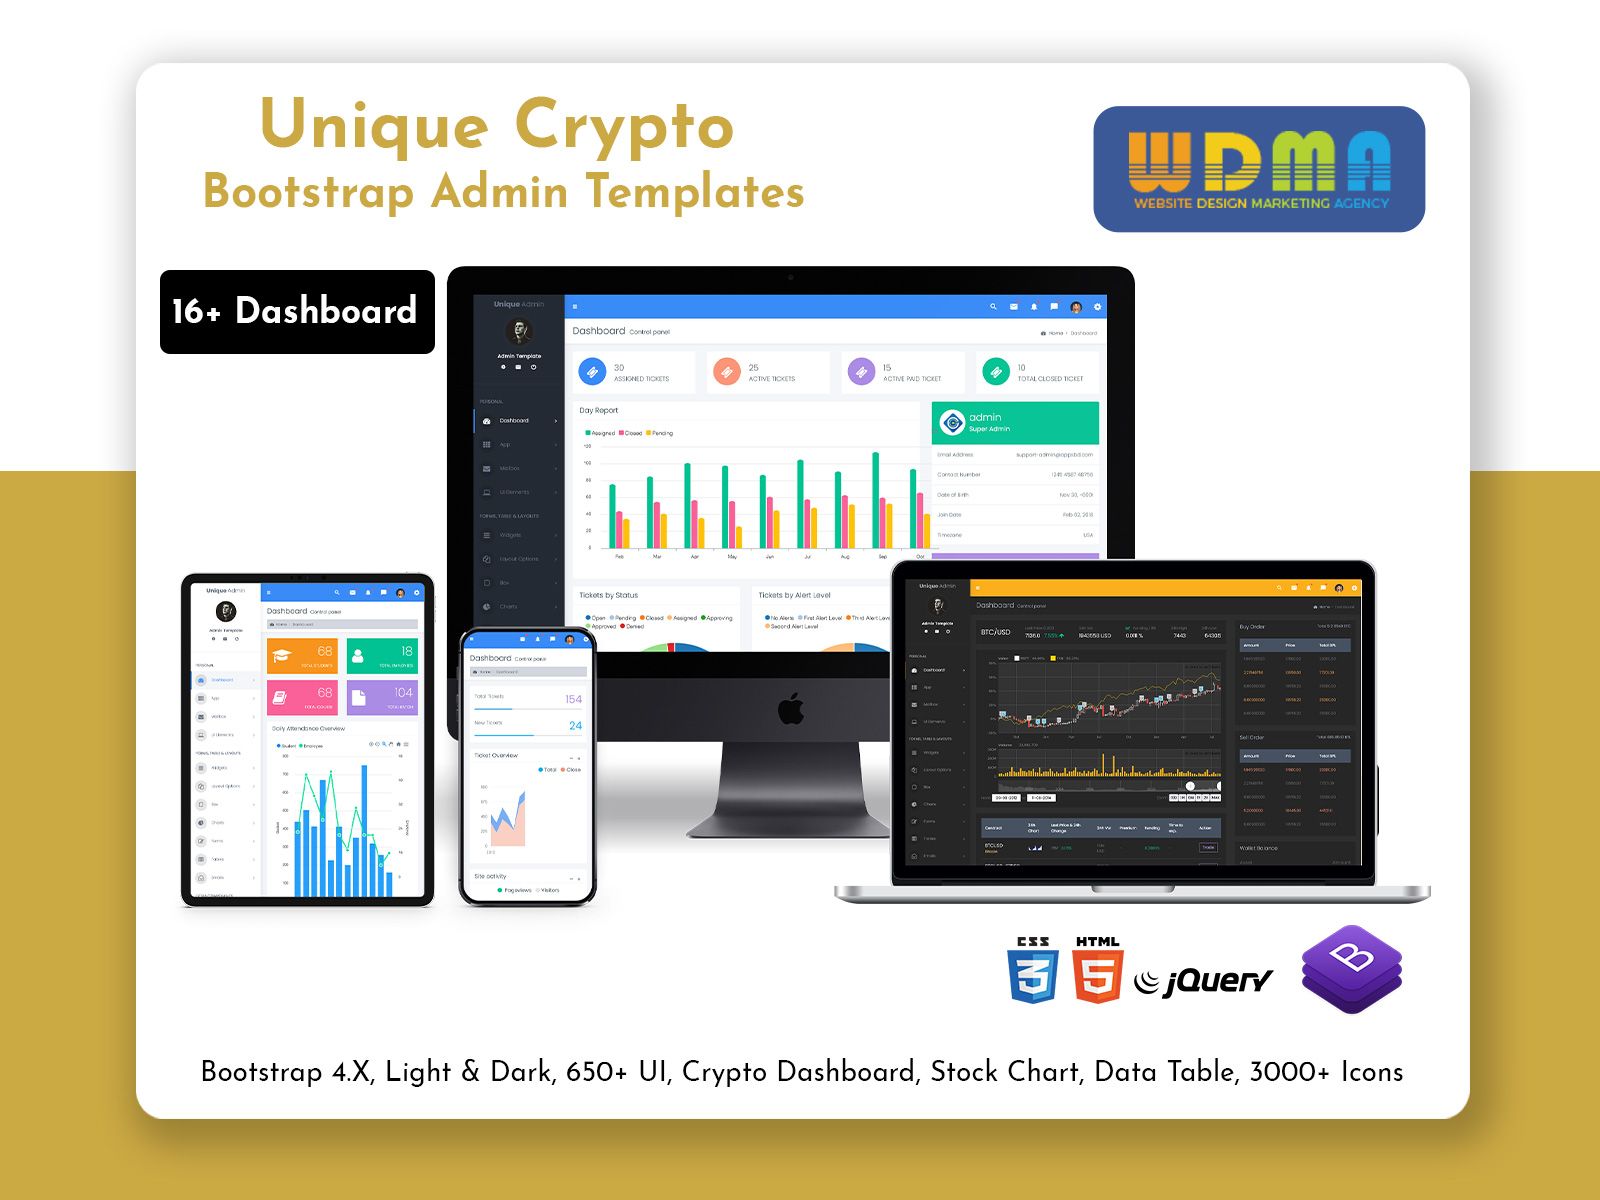 Bootstrap Admin Template: Elevate Your Crypto Management With Unique Admin